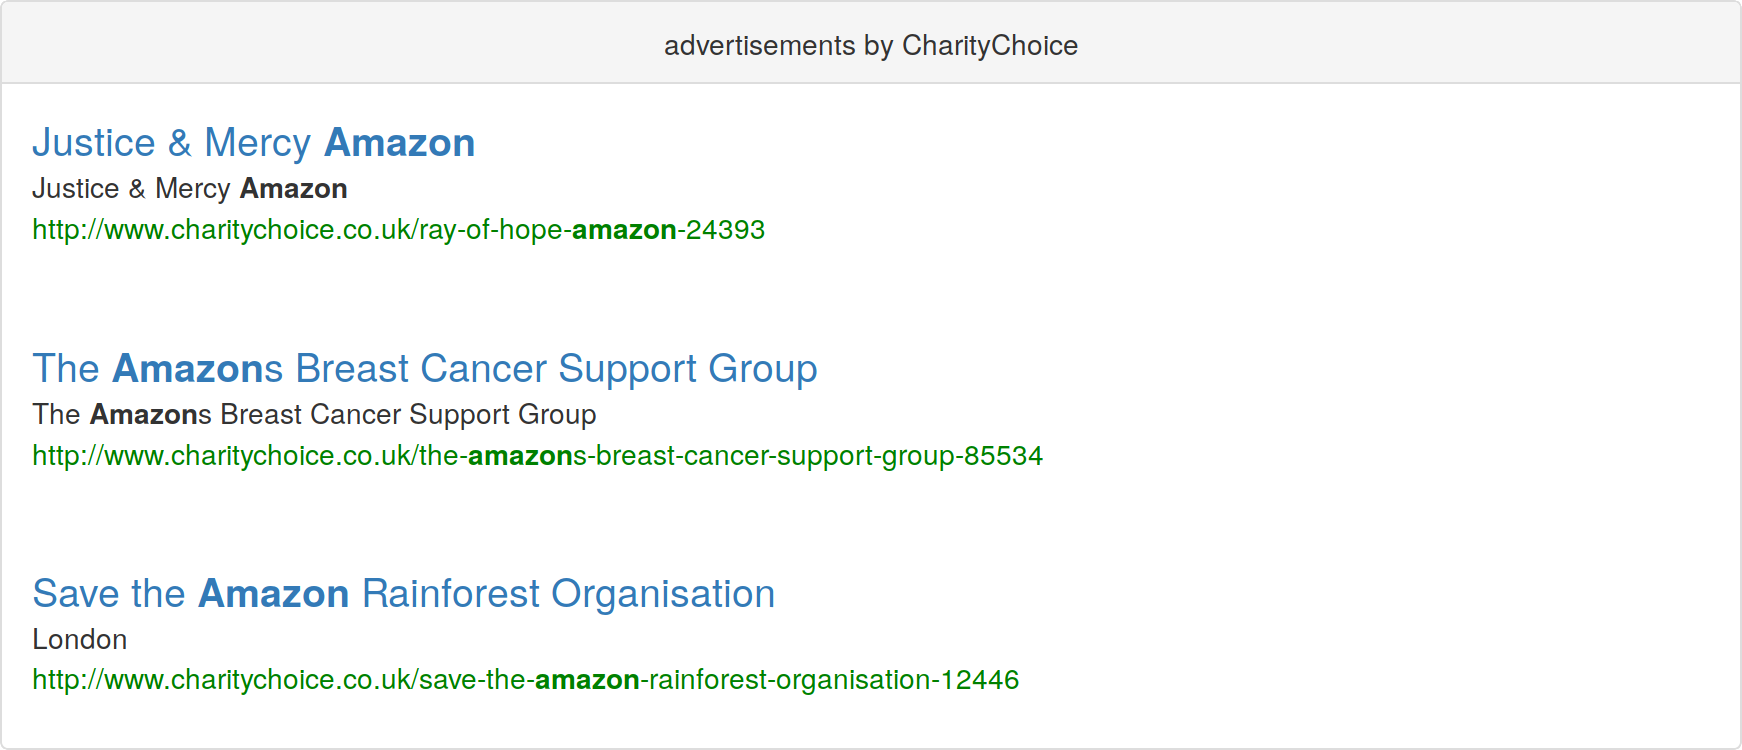 Advertisements for the query 'Amazon'